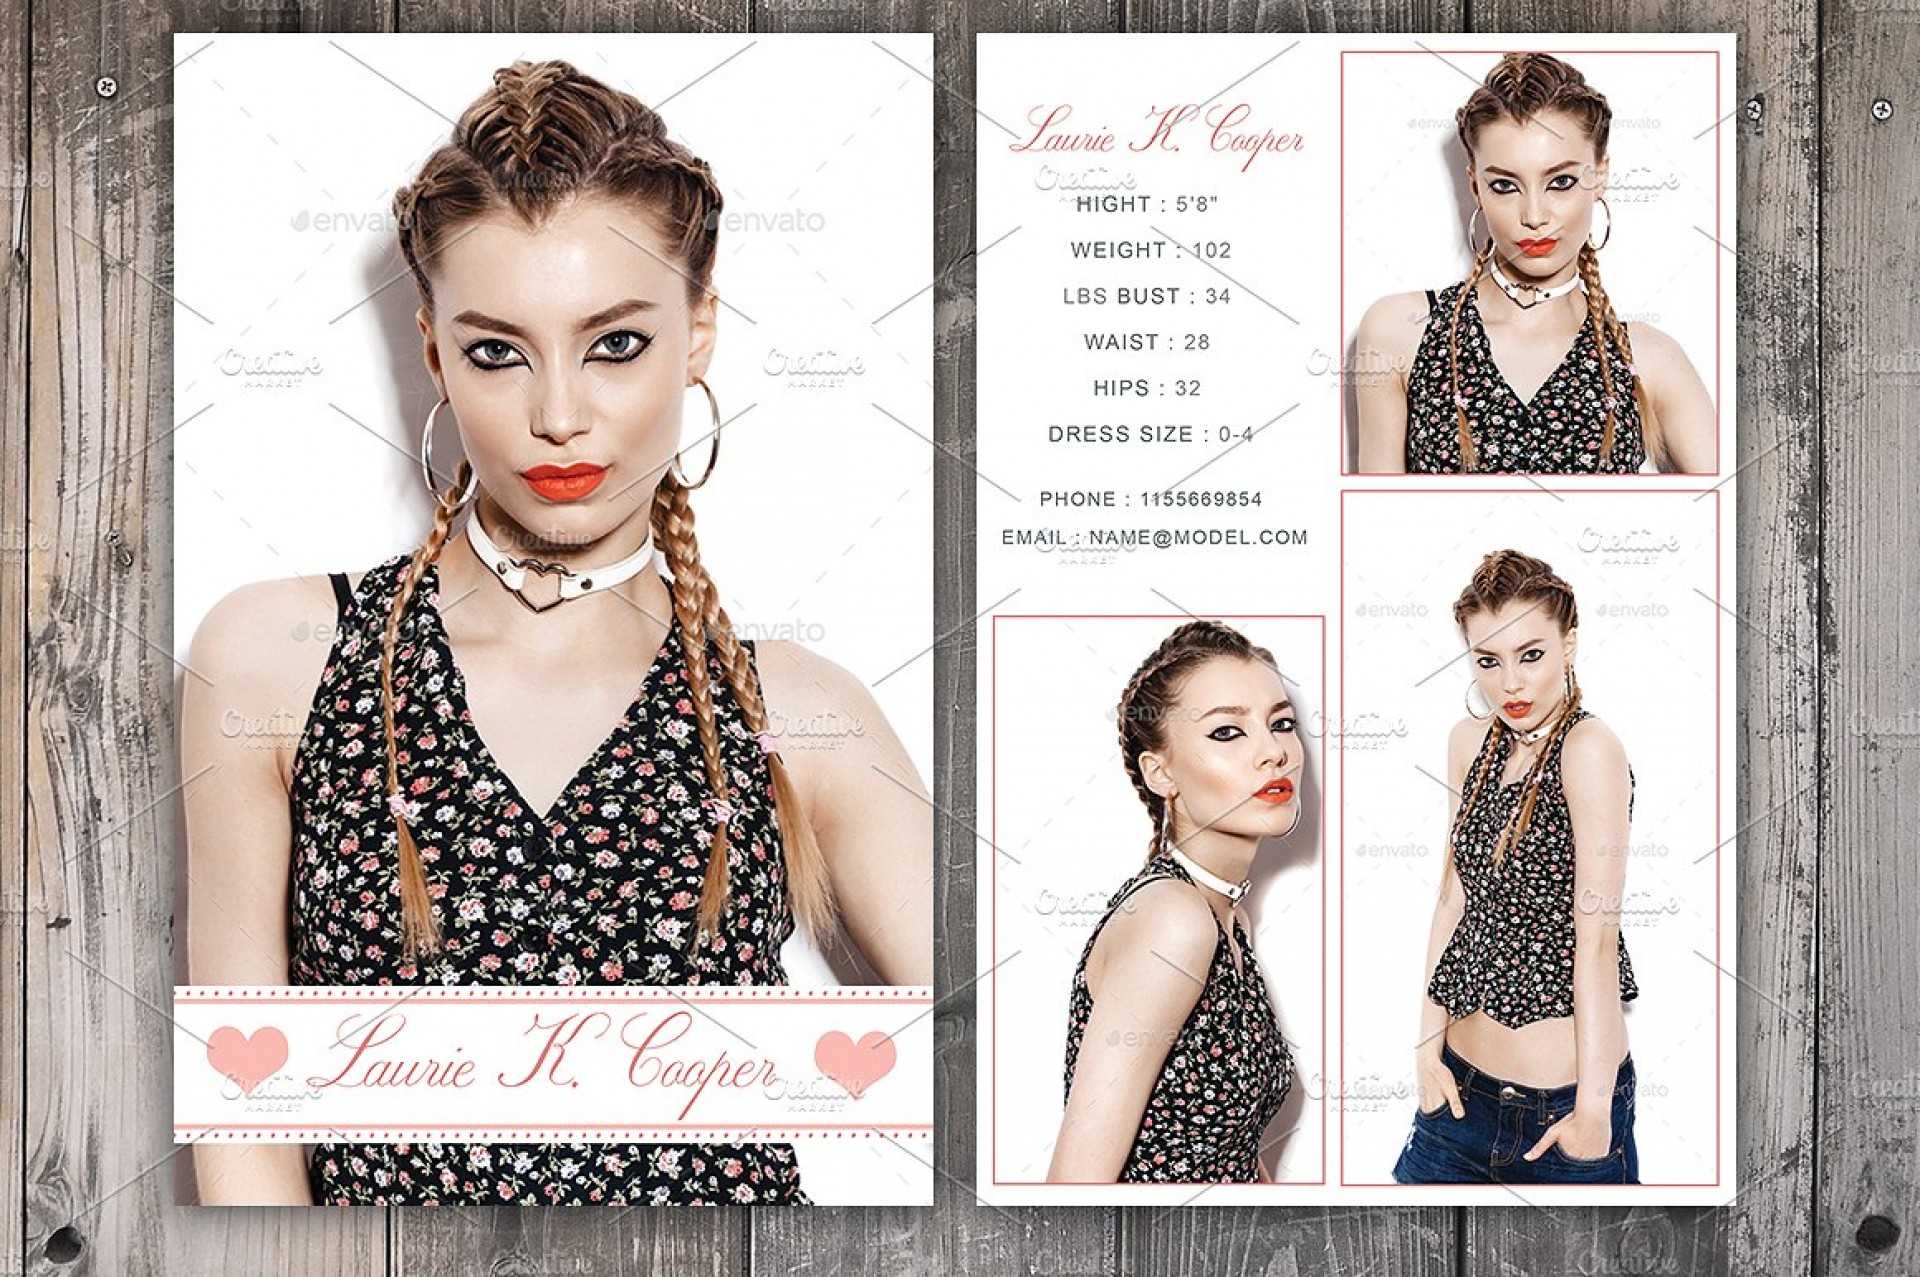 Free Model Comp Card Templates - C Punkt For Model Comp Card Template Free